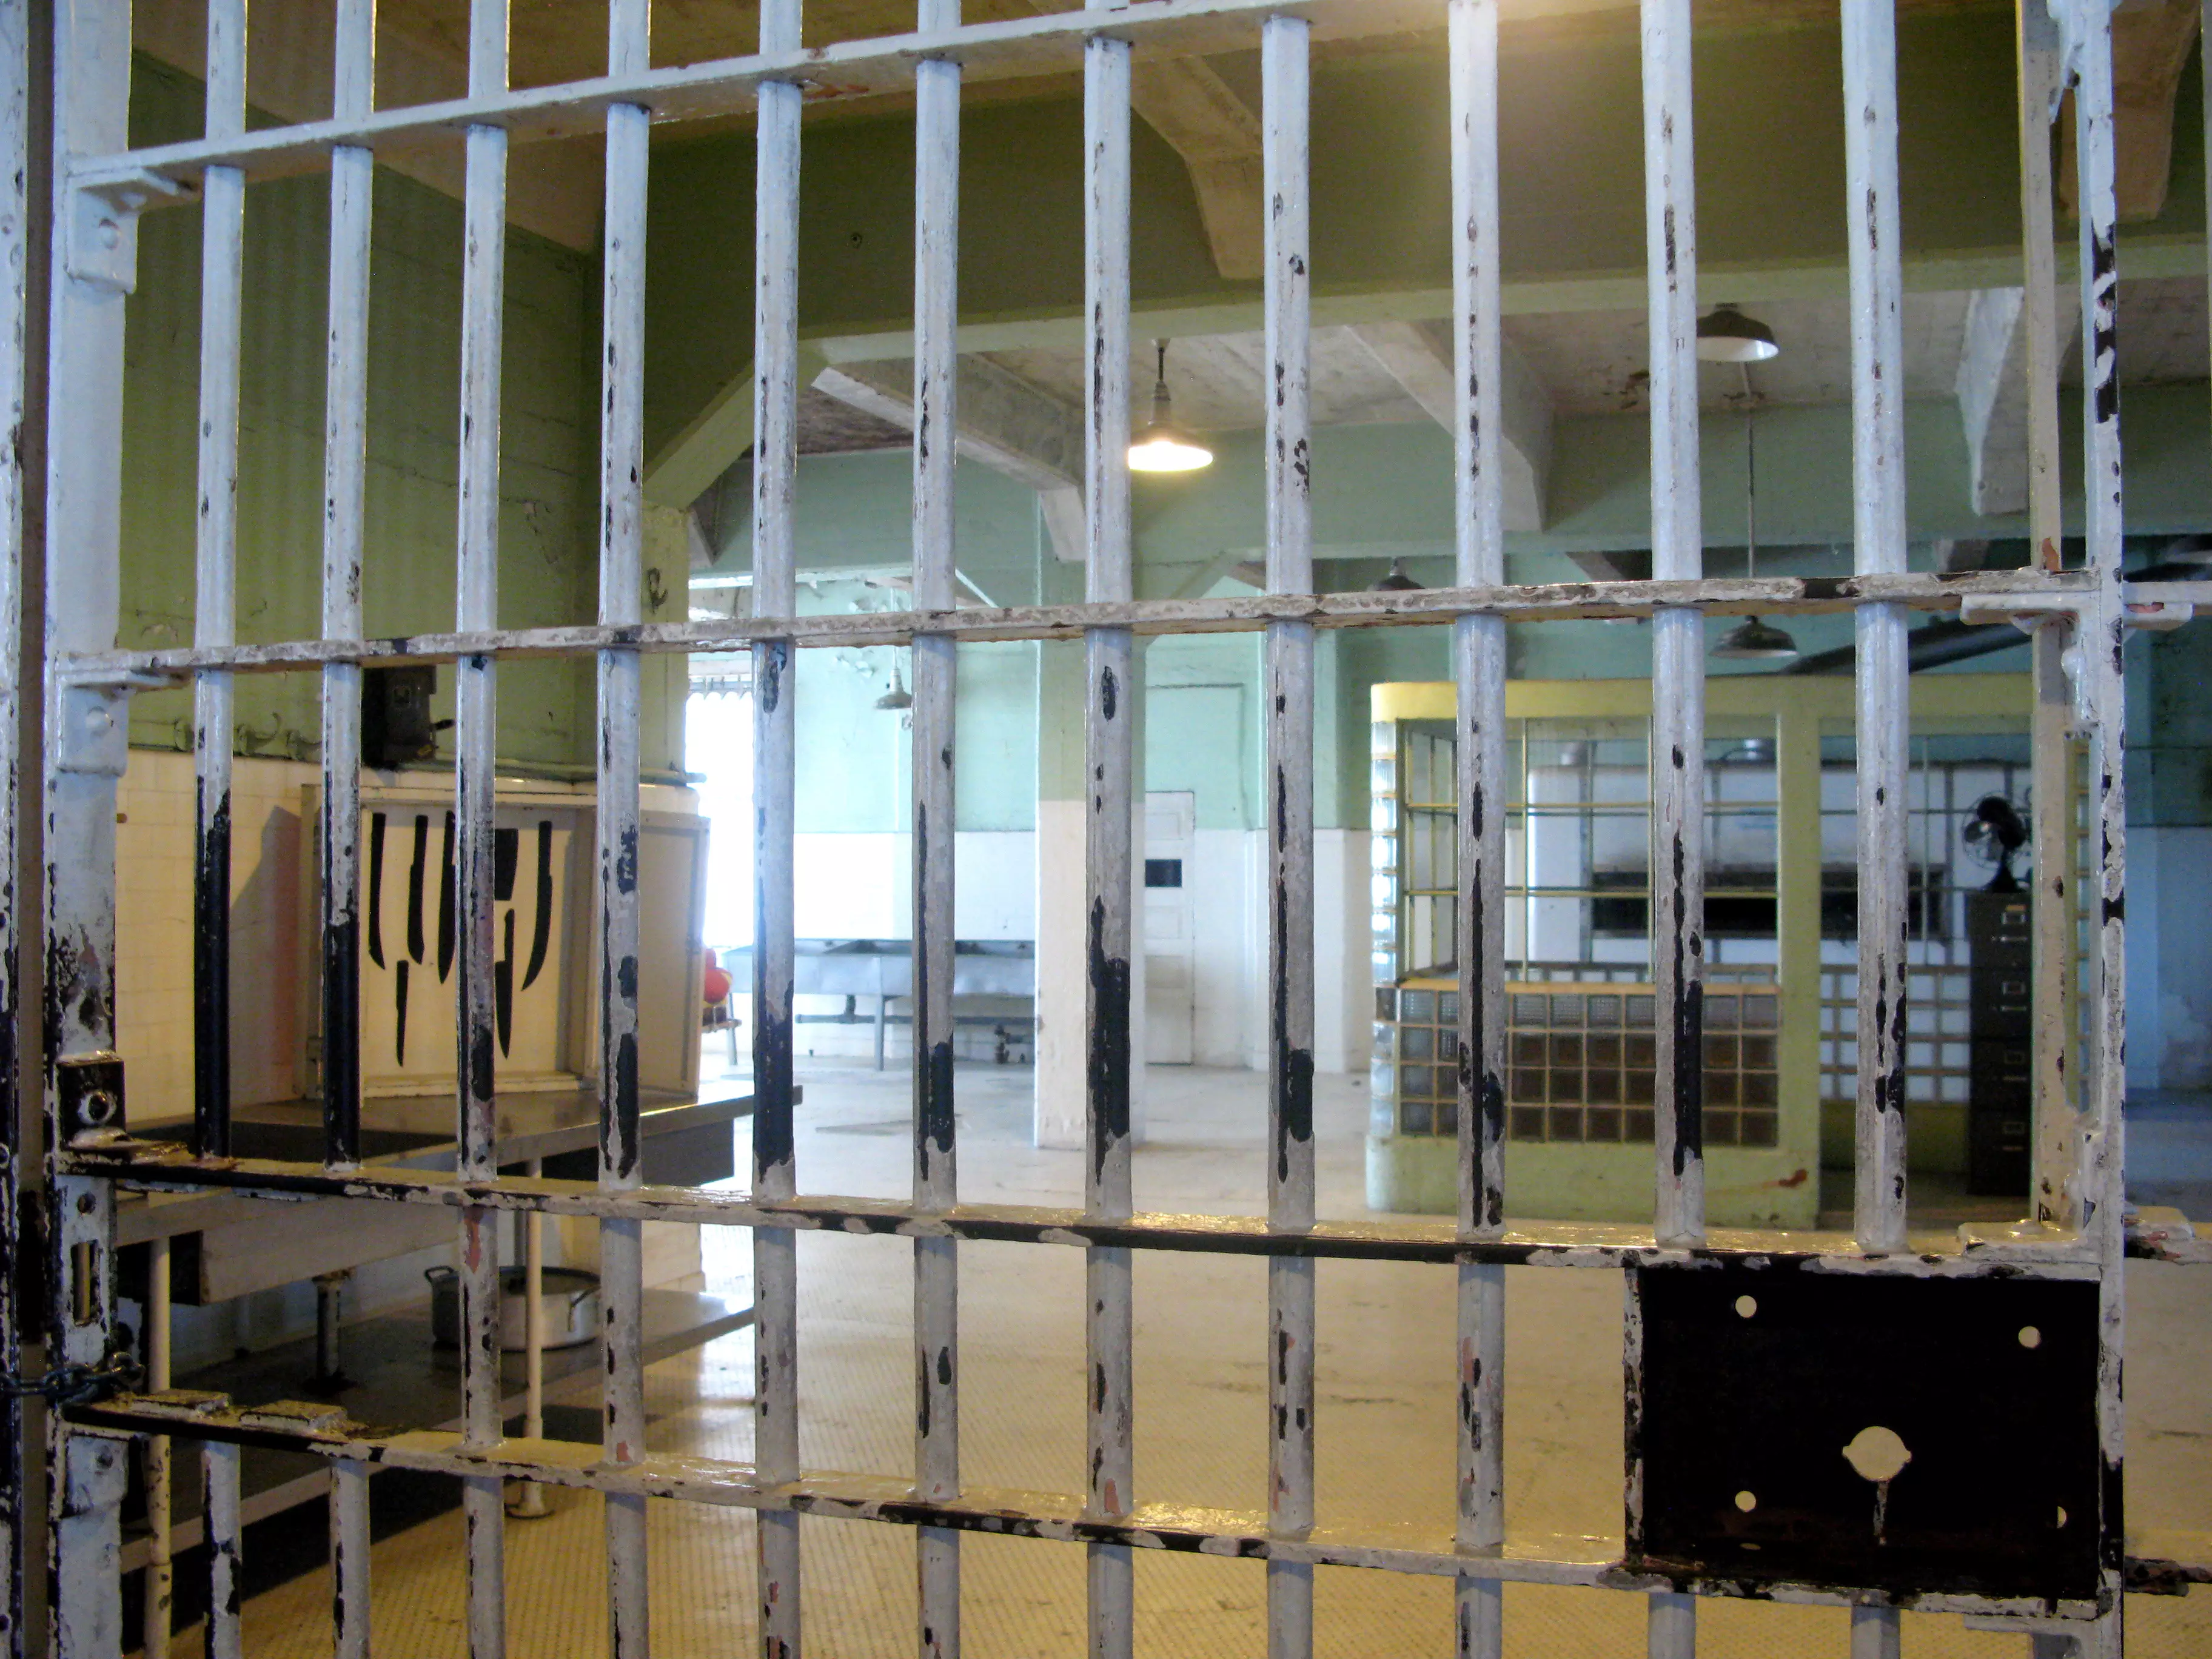 View from the mess hall to the kitchen at infamous Alcatraz prison.